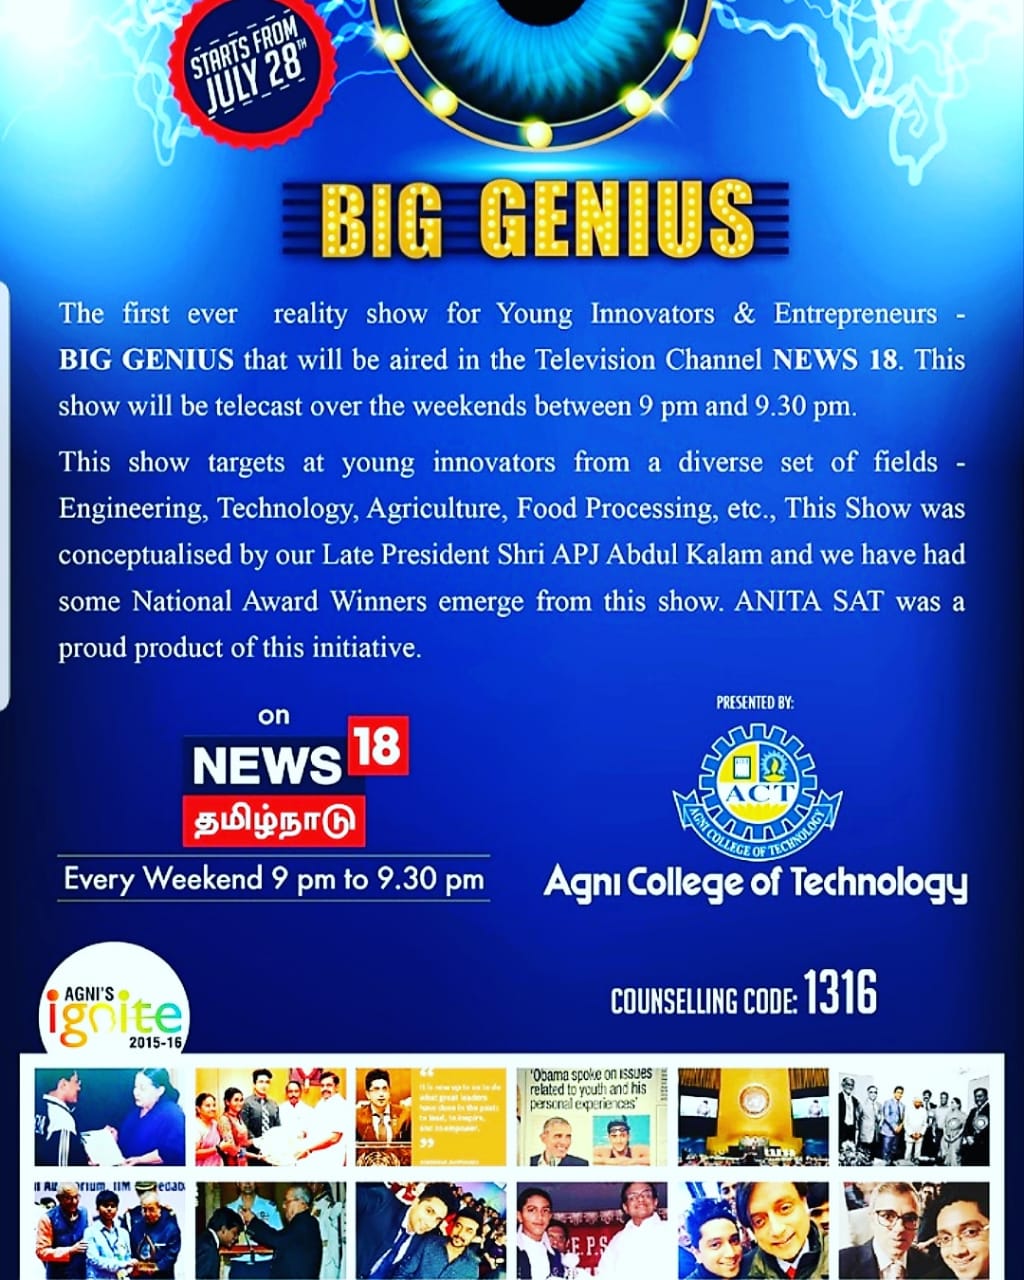 BIG GENIUS PROMO! 1st ever Reality TV show for Young Innovators and Entrepreneurs airs Weekends 9pm from July 28! Please Support & Share Abdul Kalam Sirs Vision.